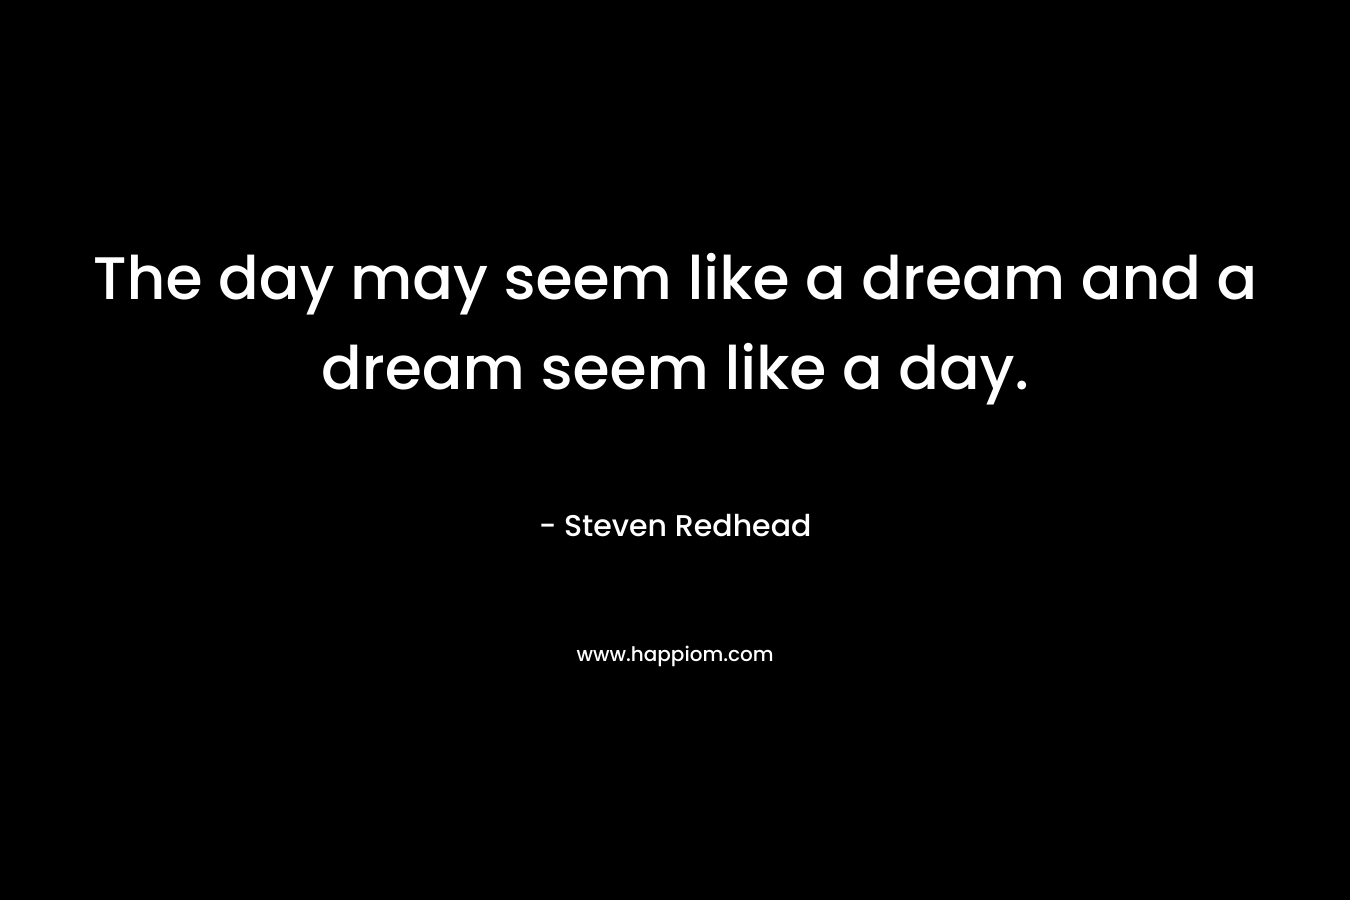 The day may seem like a dream and a dream seem like a day.